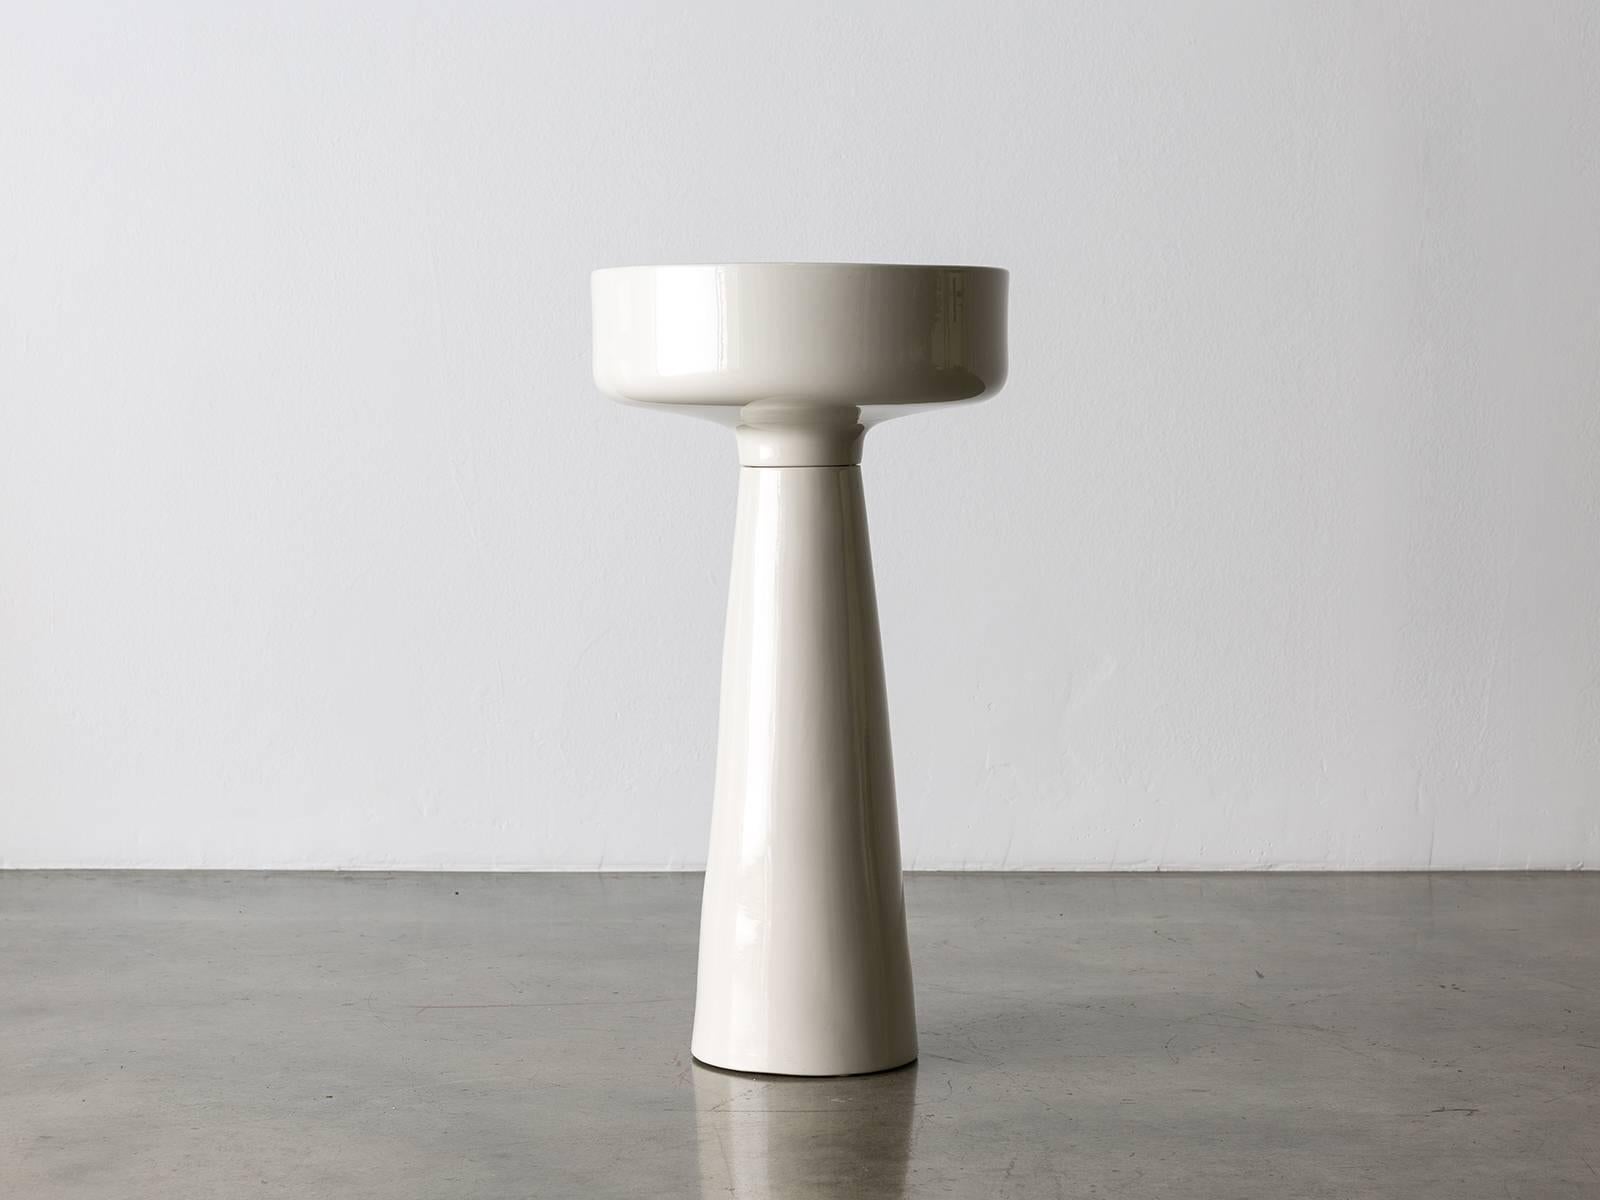 A handmade ceramic standing planter comprised of two pieces. Designed by Angelo Mangiarotti as part of collaboration with the ceramics firm Fratelli Brambilla on a number of vitreous china pieces. The beautiful white glazing highlights the organic